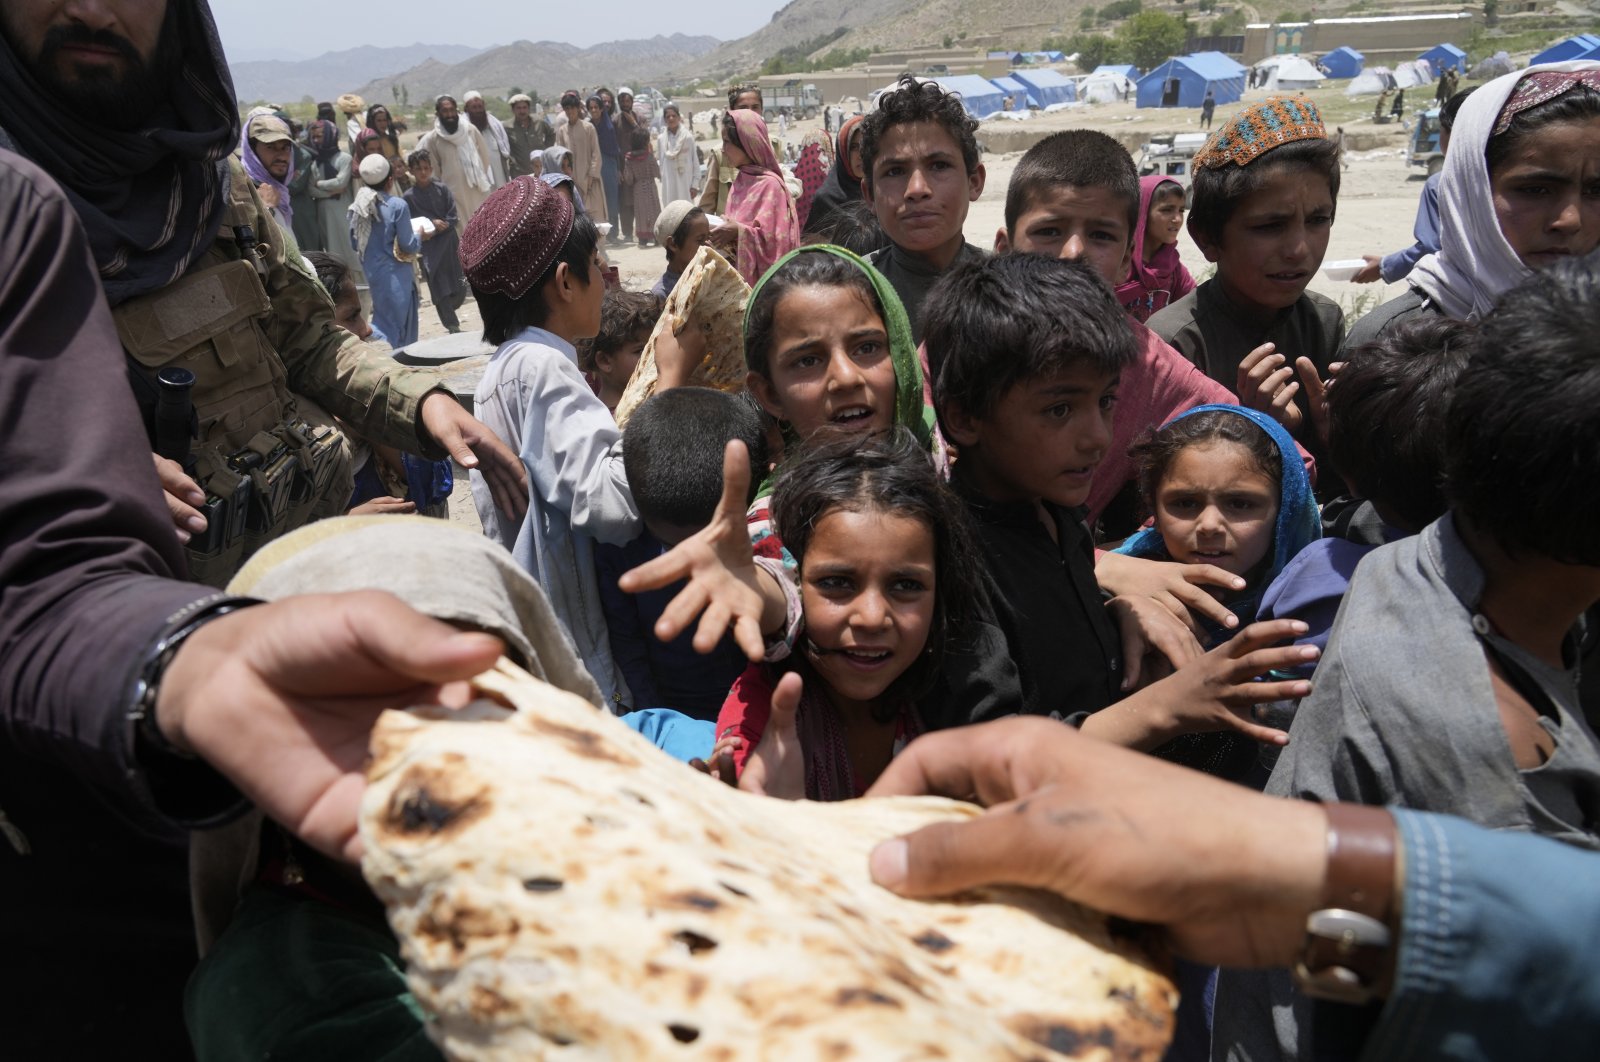 Afghans receive aid at a camp after an earthquake in the Gayan district of Paktika province, Afghanistan, June 26, 2022. (AP Photo)